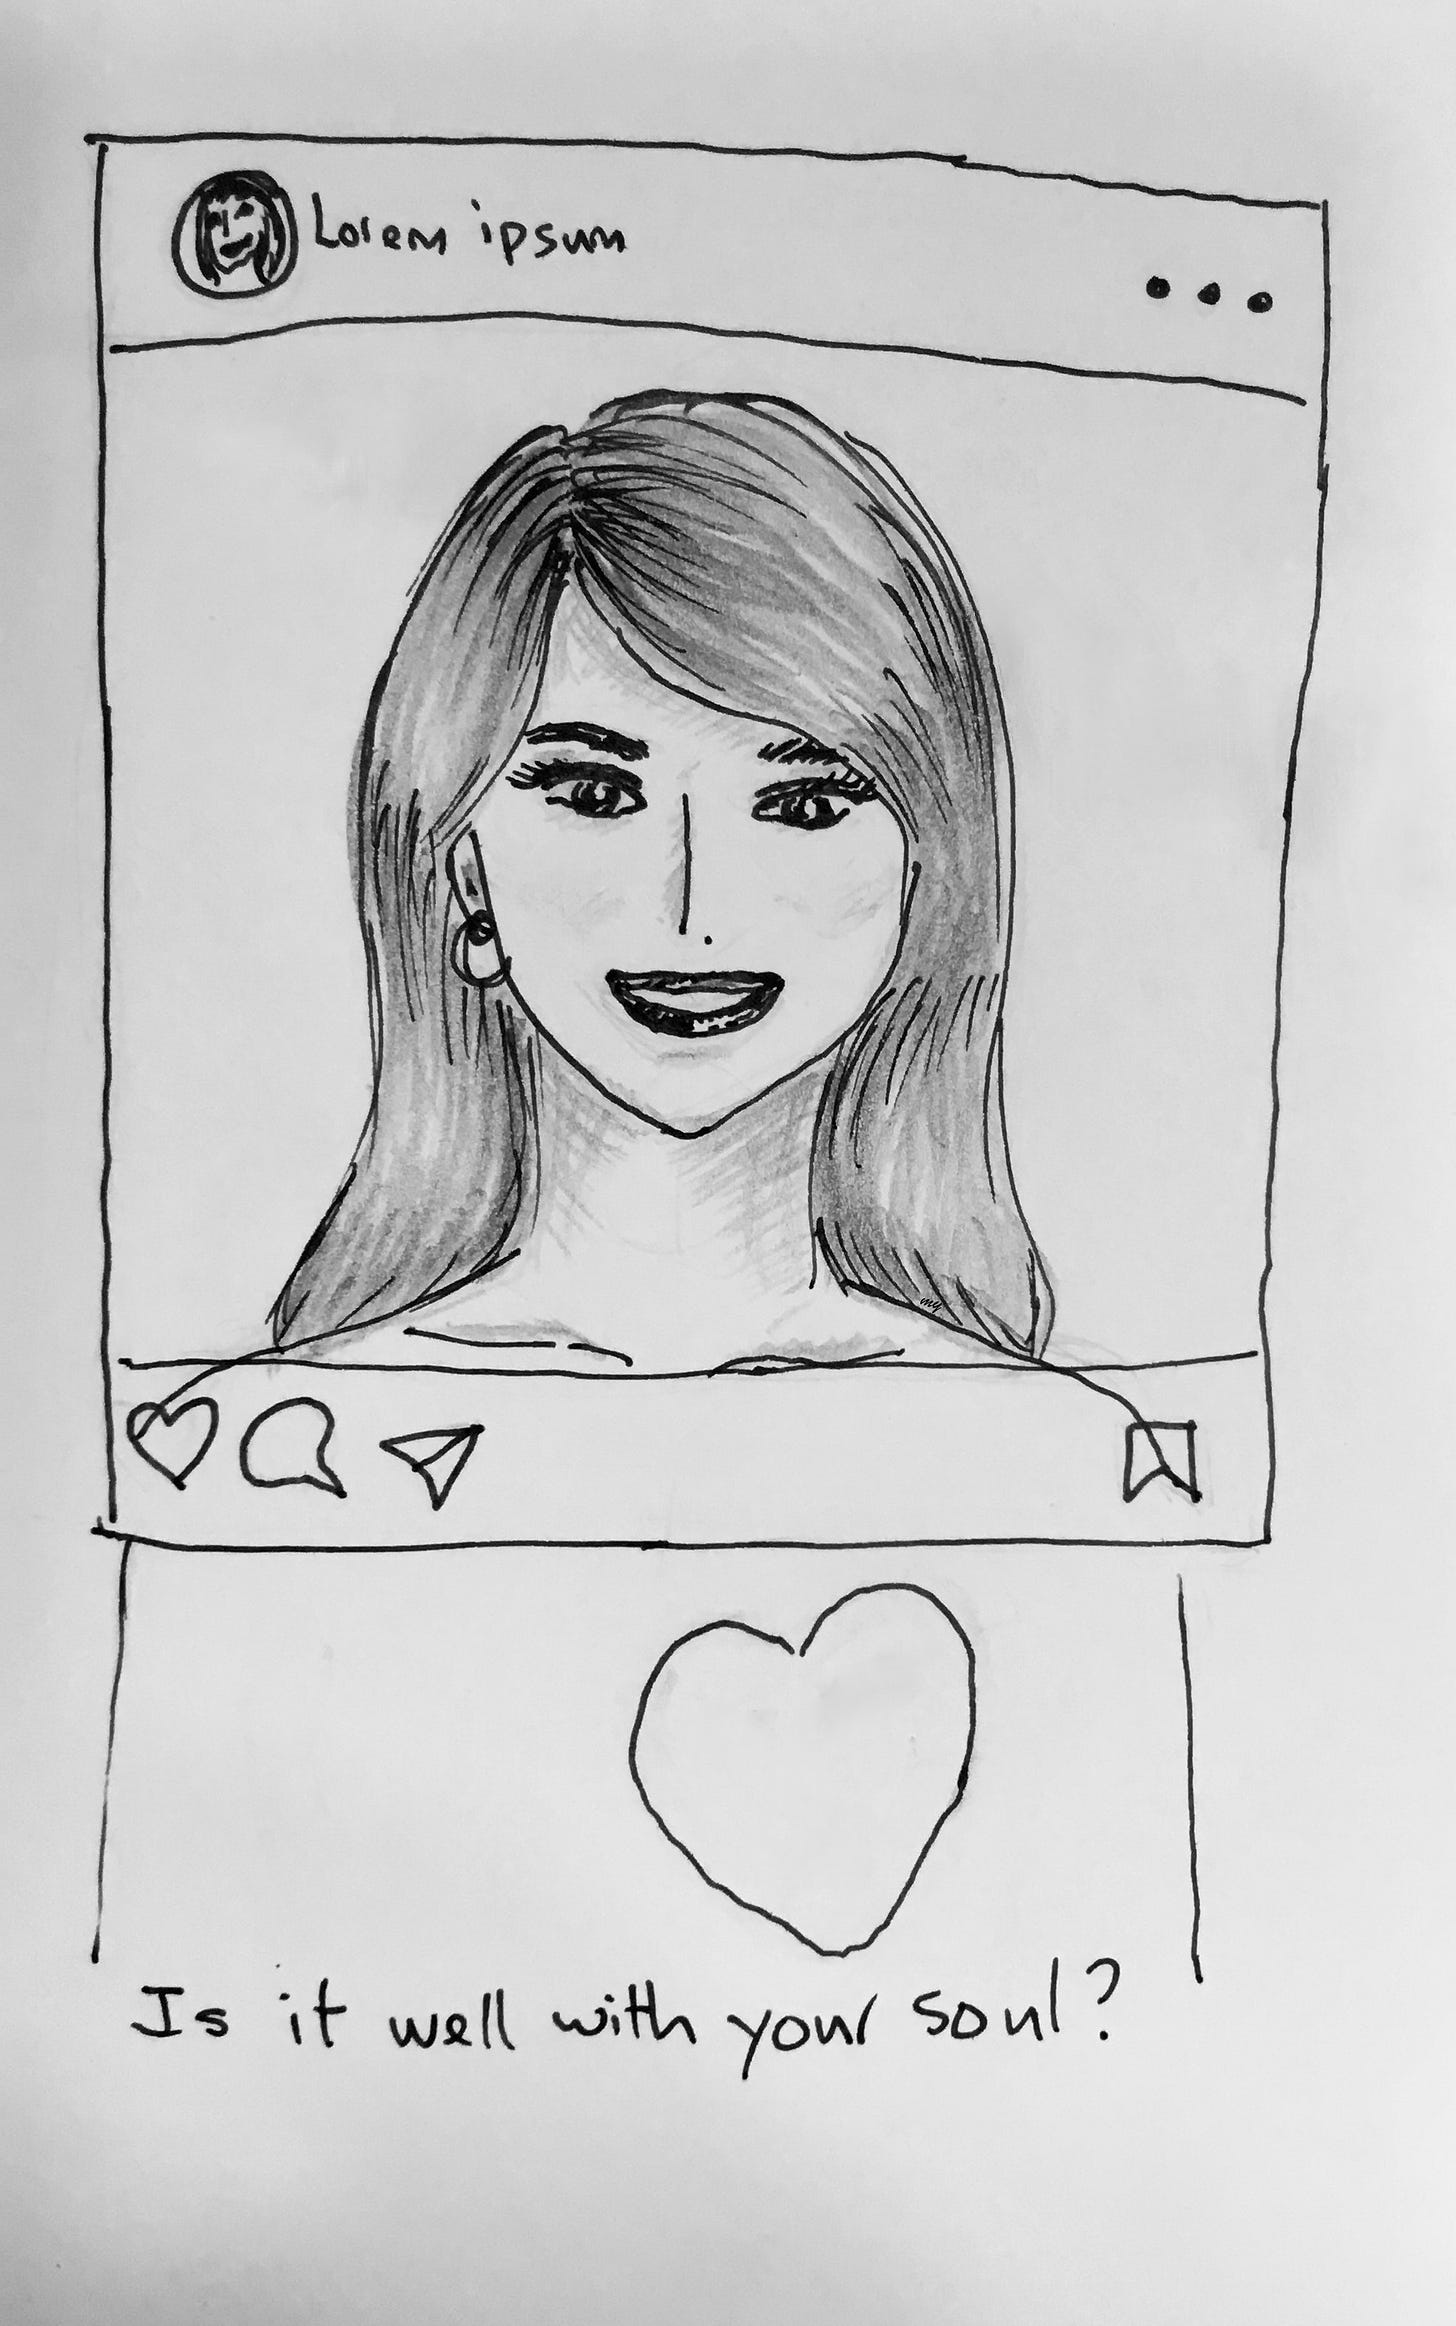 ink and pencil portrait of a woman with long hair, smiling, it's her post on social media, a nice photo. Beneath the social media frame, there's a heart, with the question: is it well with your soul? The idea is how some of us curate a nice facade of ourselves, but really, how are we doing in our hearts? Are we well?